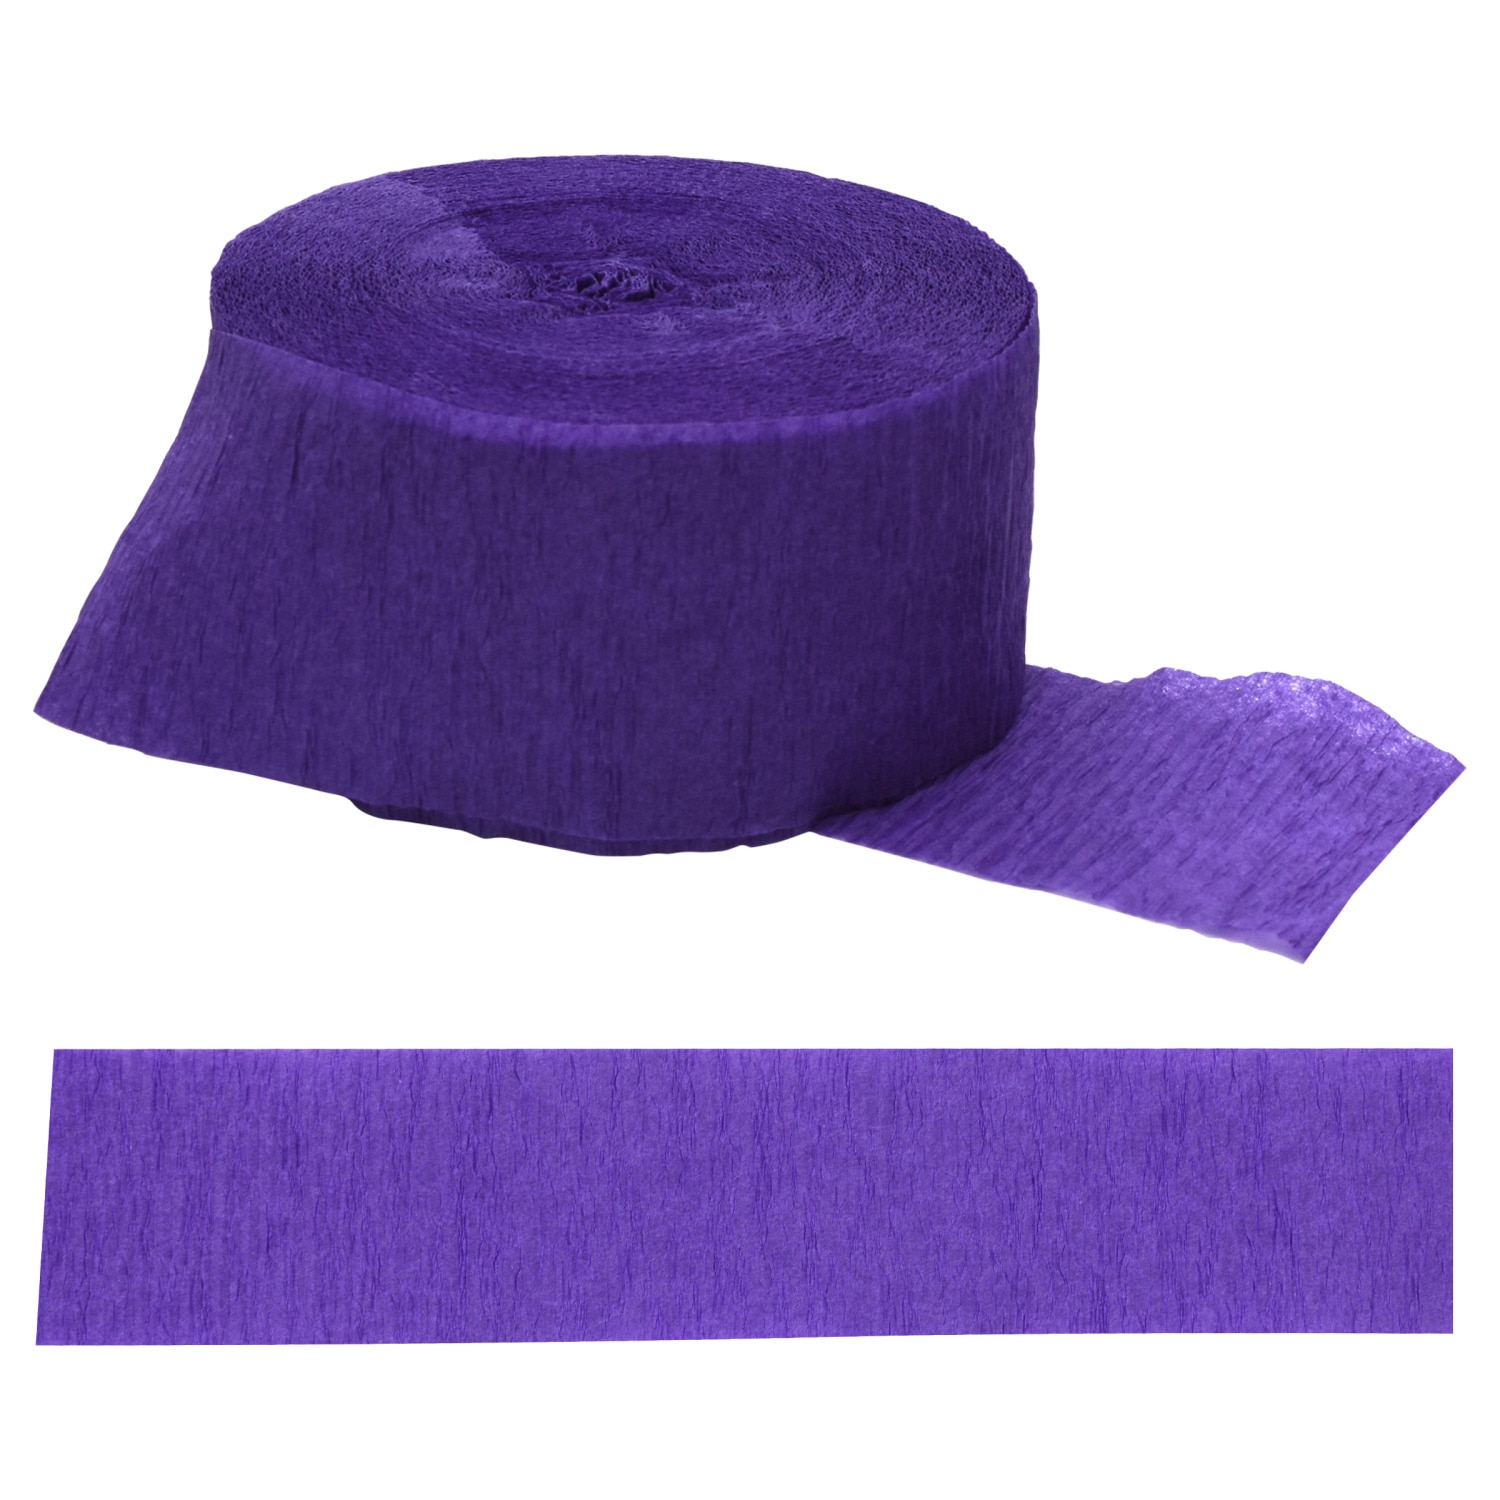 Crepe Paper Roll for Wedding Decorations And Birthday Celebrations Pack of 4 Details about  / 